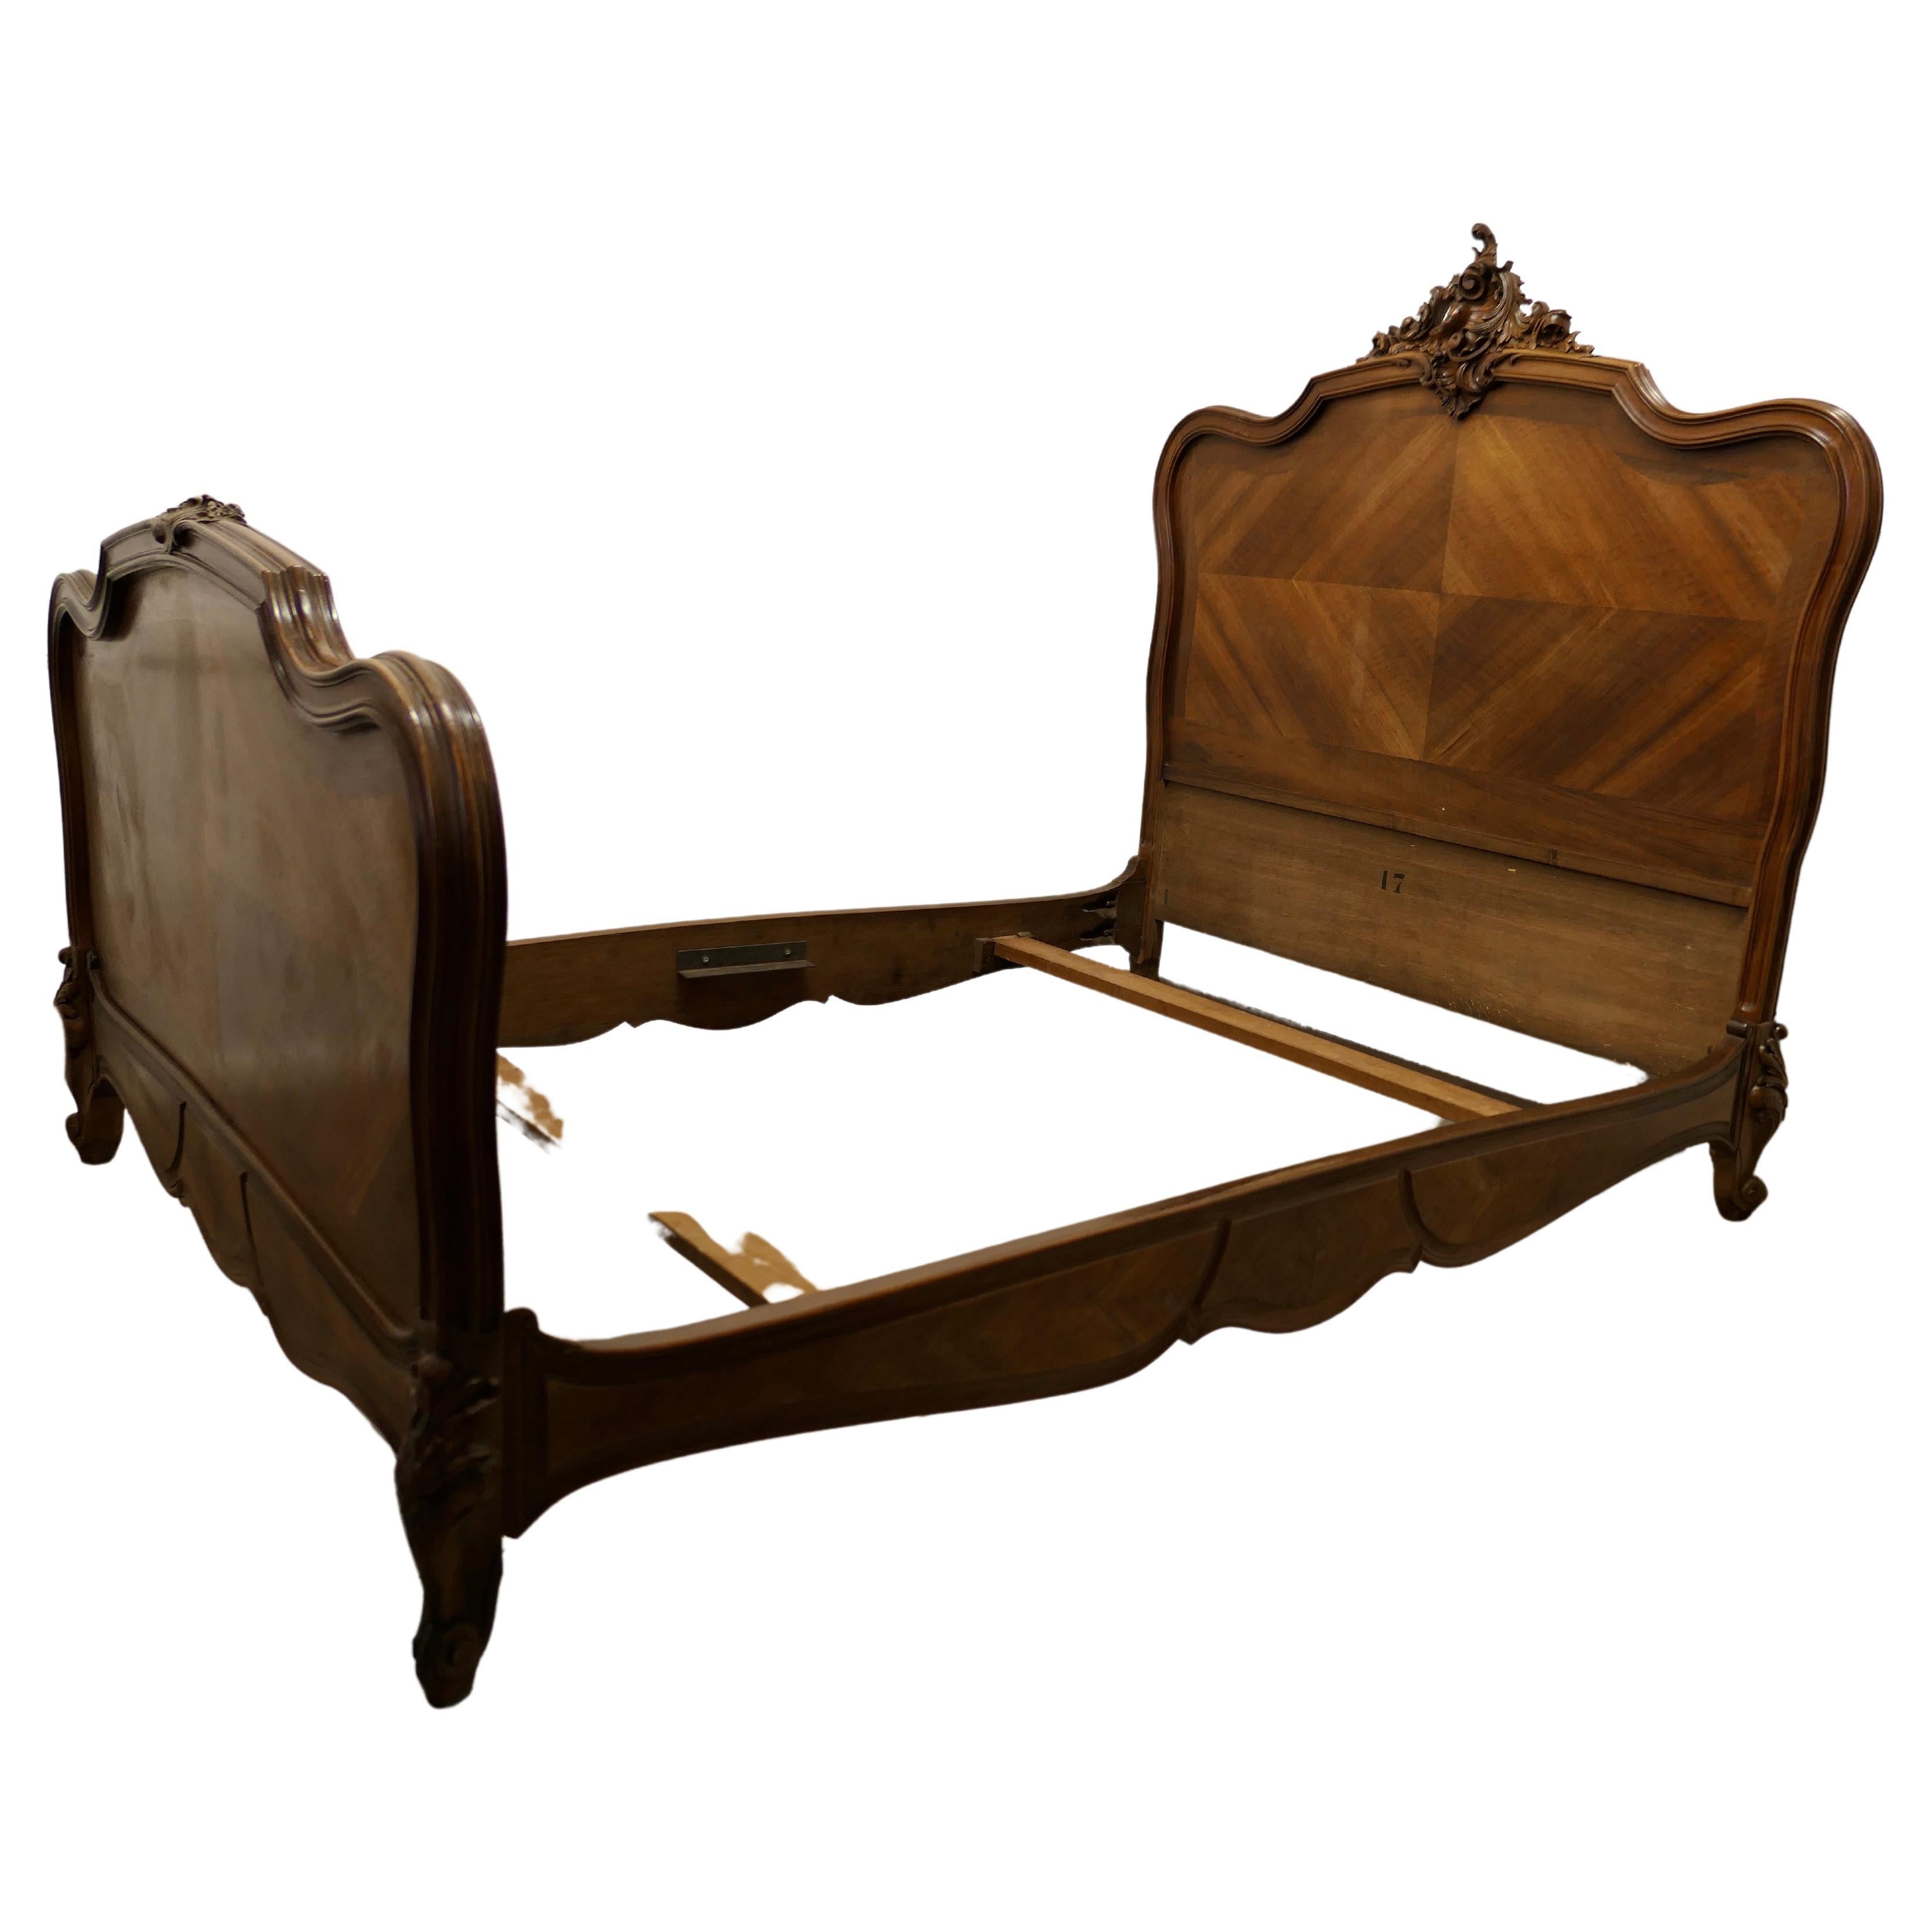 Louis XV Style French Golden Walnut Bed